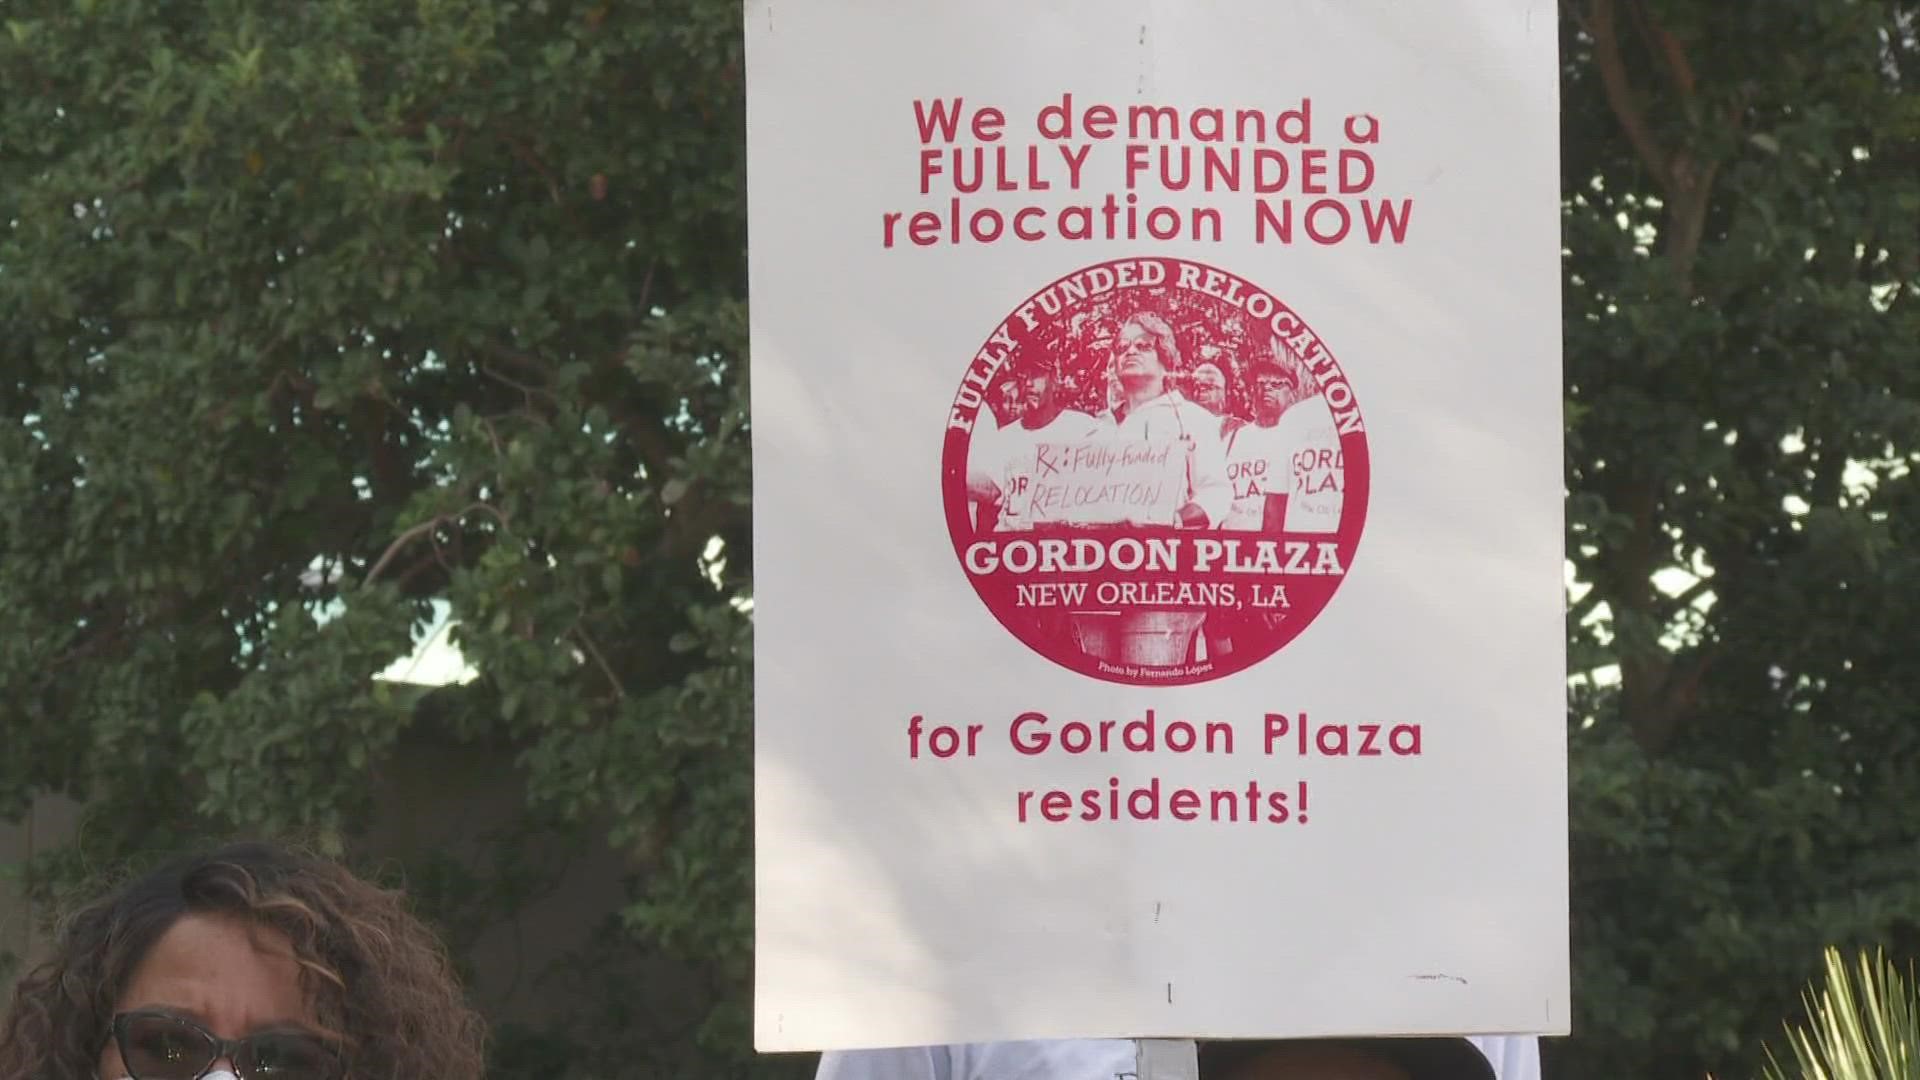 Gordon Plaza residents are still demanding decades later to be relocated away from the neighborhood built on top of a landfill causing illness to residents.